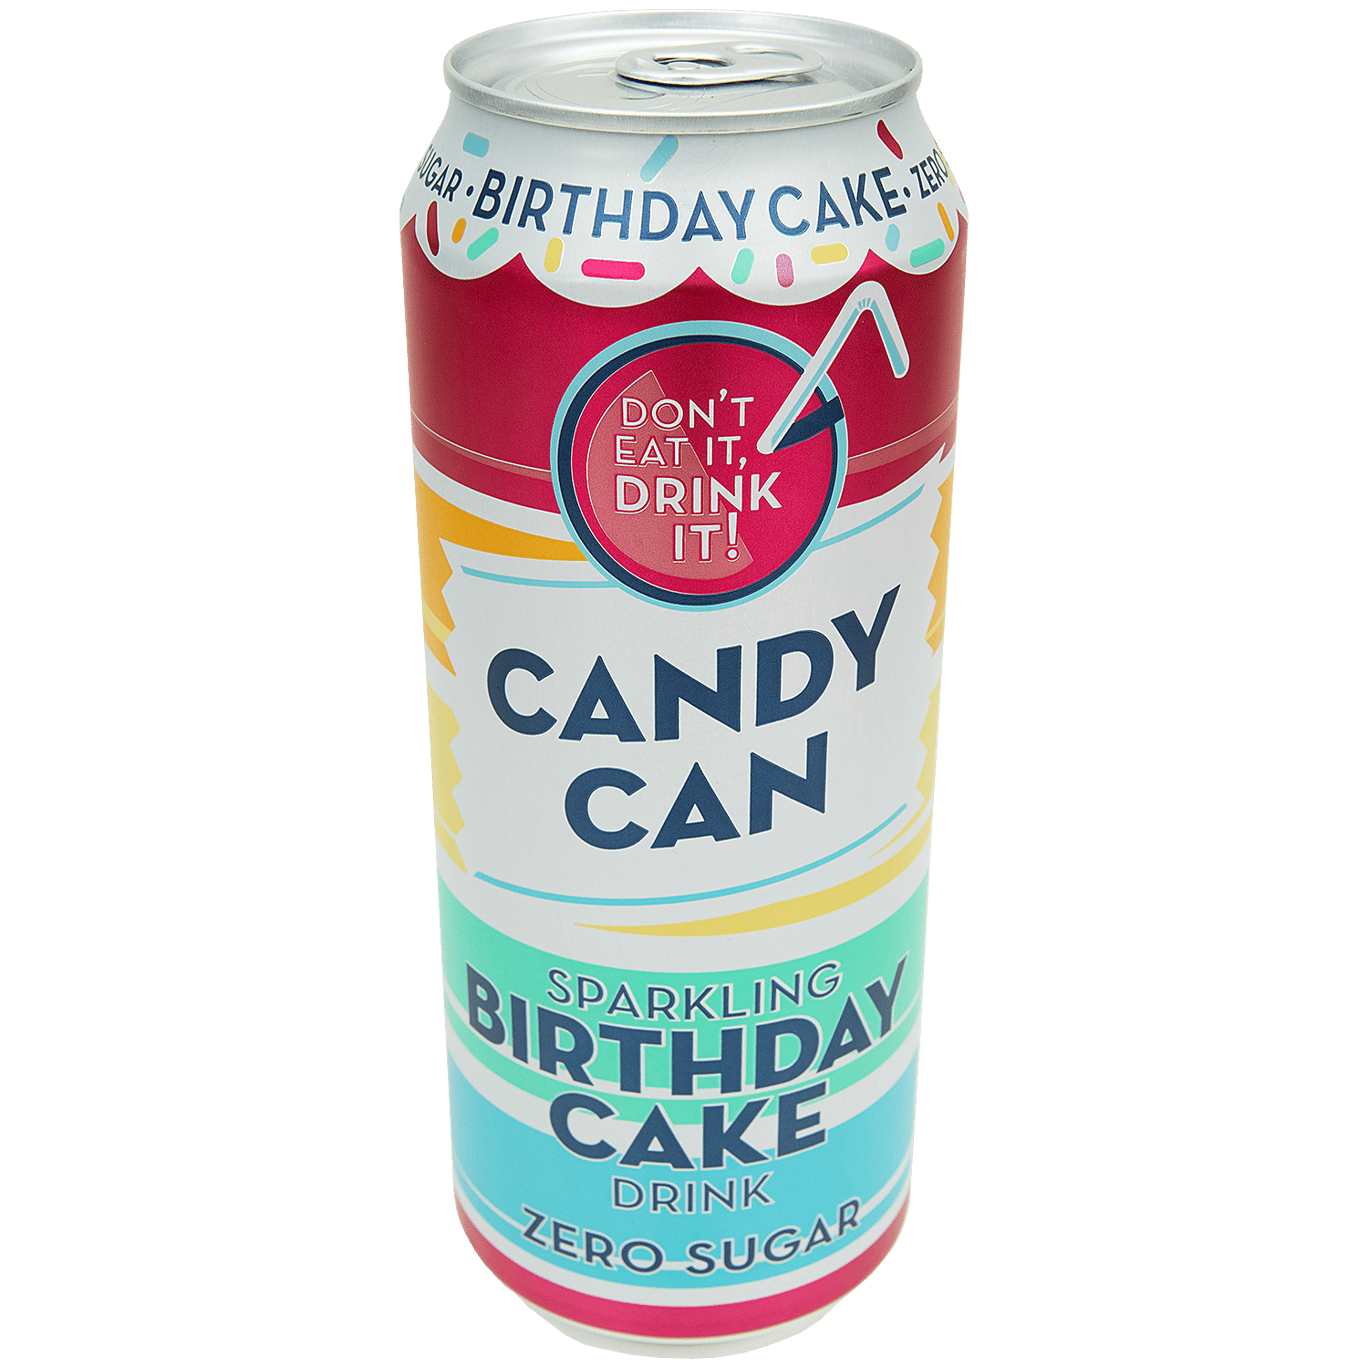 Bevanda Candy Can